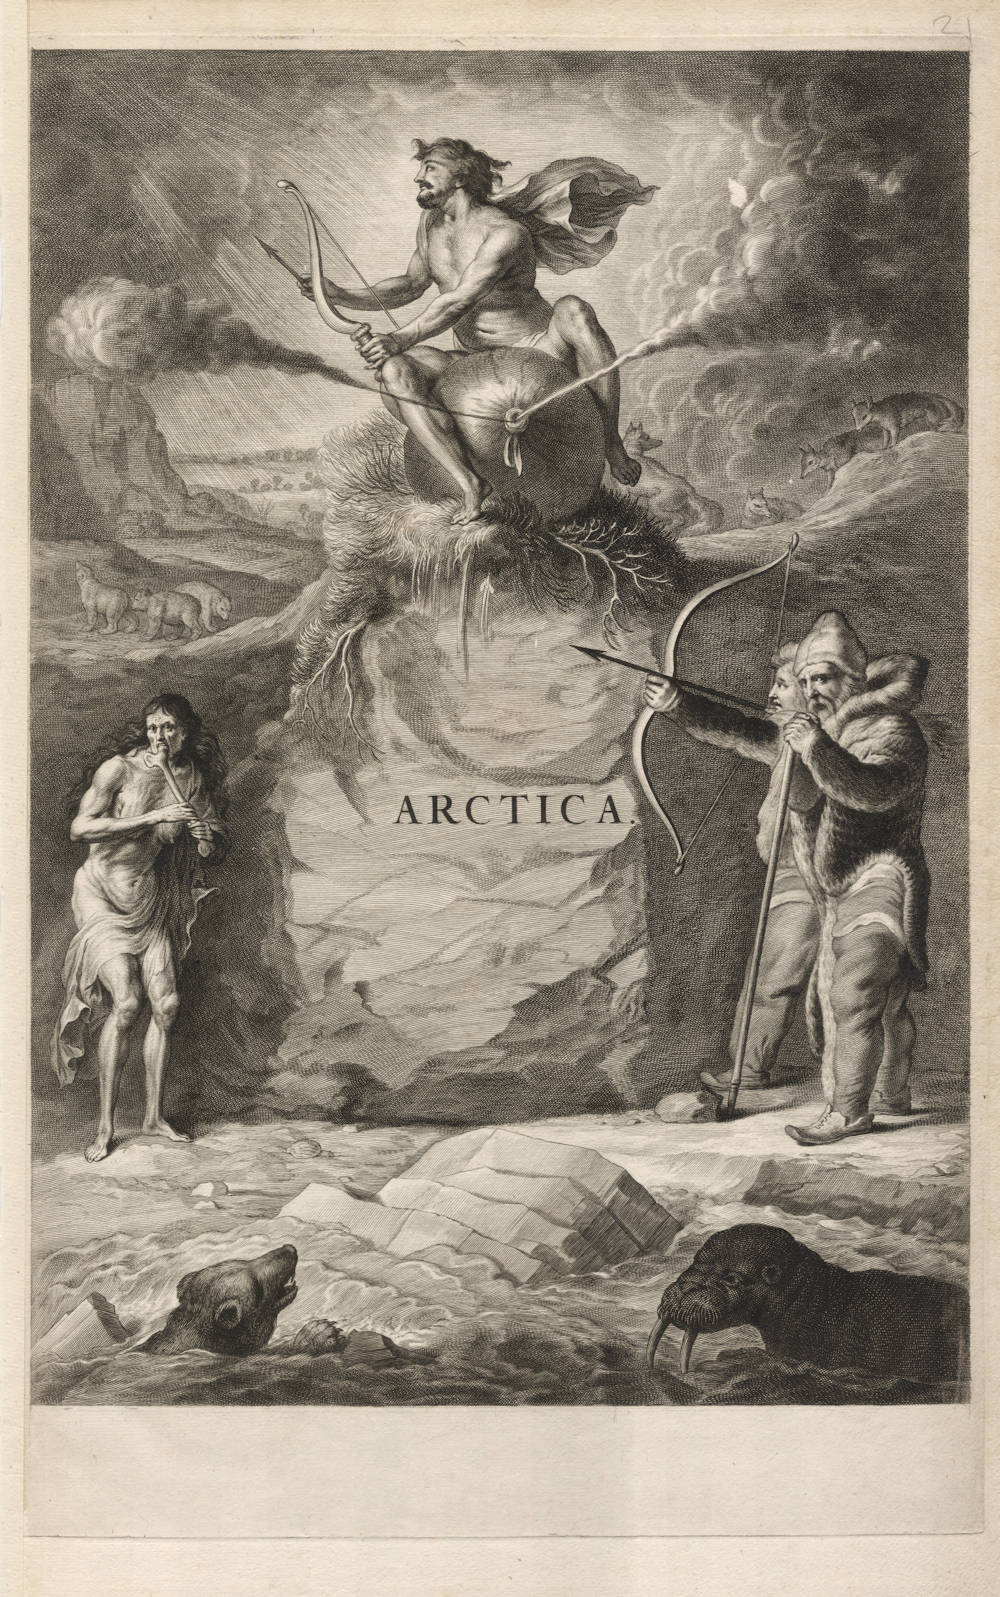 Old Master Print of the Allegory of Arctica- Atlas Maior frontispiece by Joan Blaeu